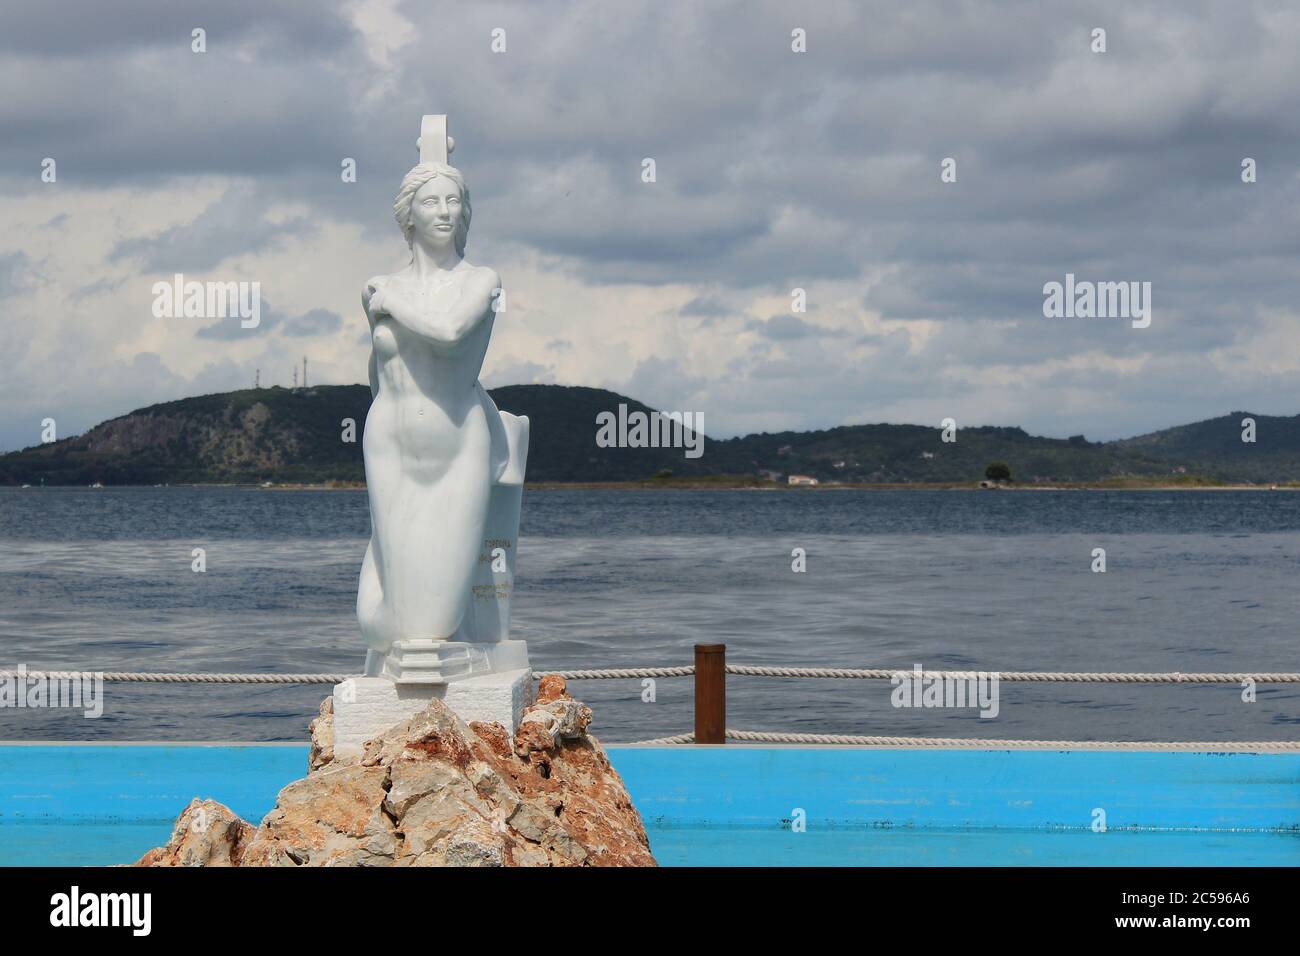 Preveza, Epirus / Greece - 05/21/2020: Mermaid sculpture in a fountain in port of Preveza town in Greece. Soft focus at the Ambracian gulf at the back Stock Photo